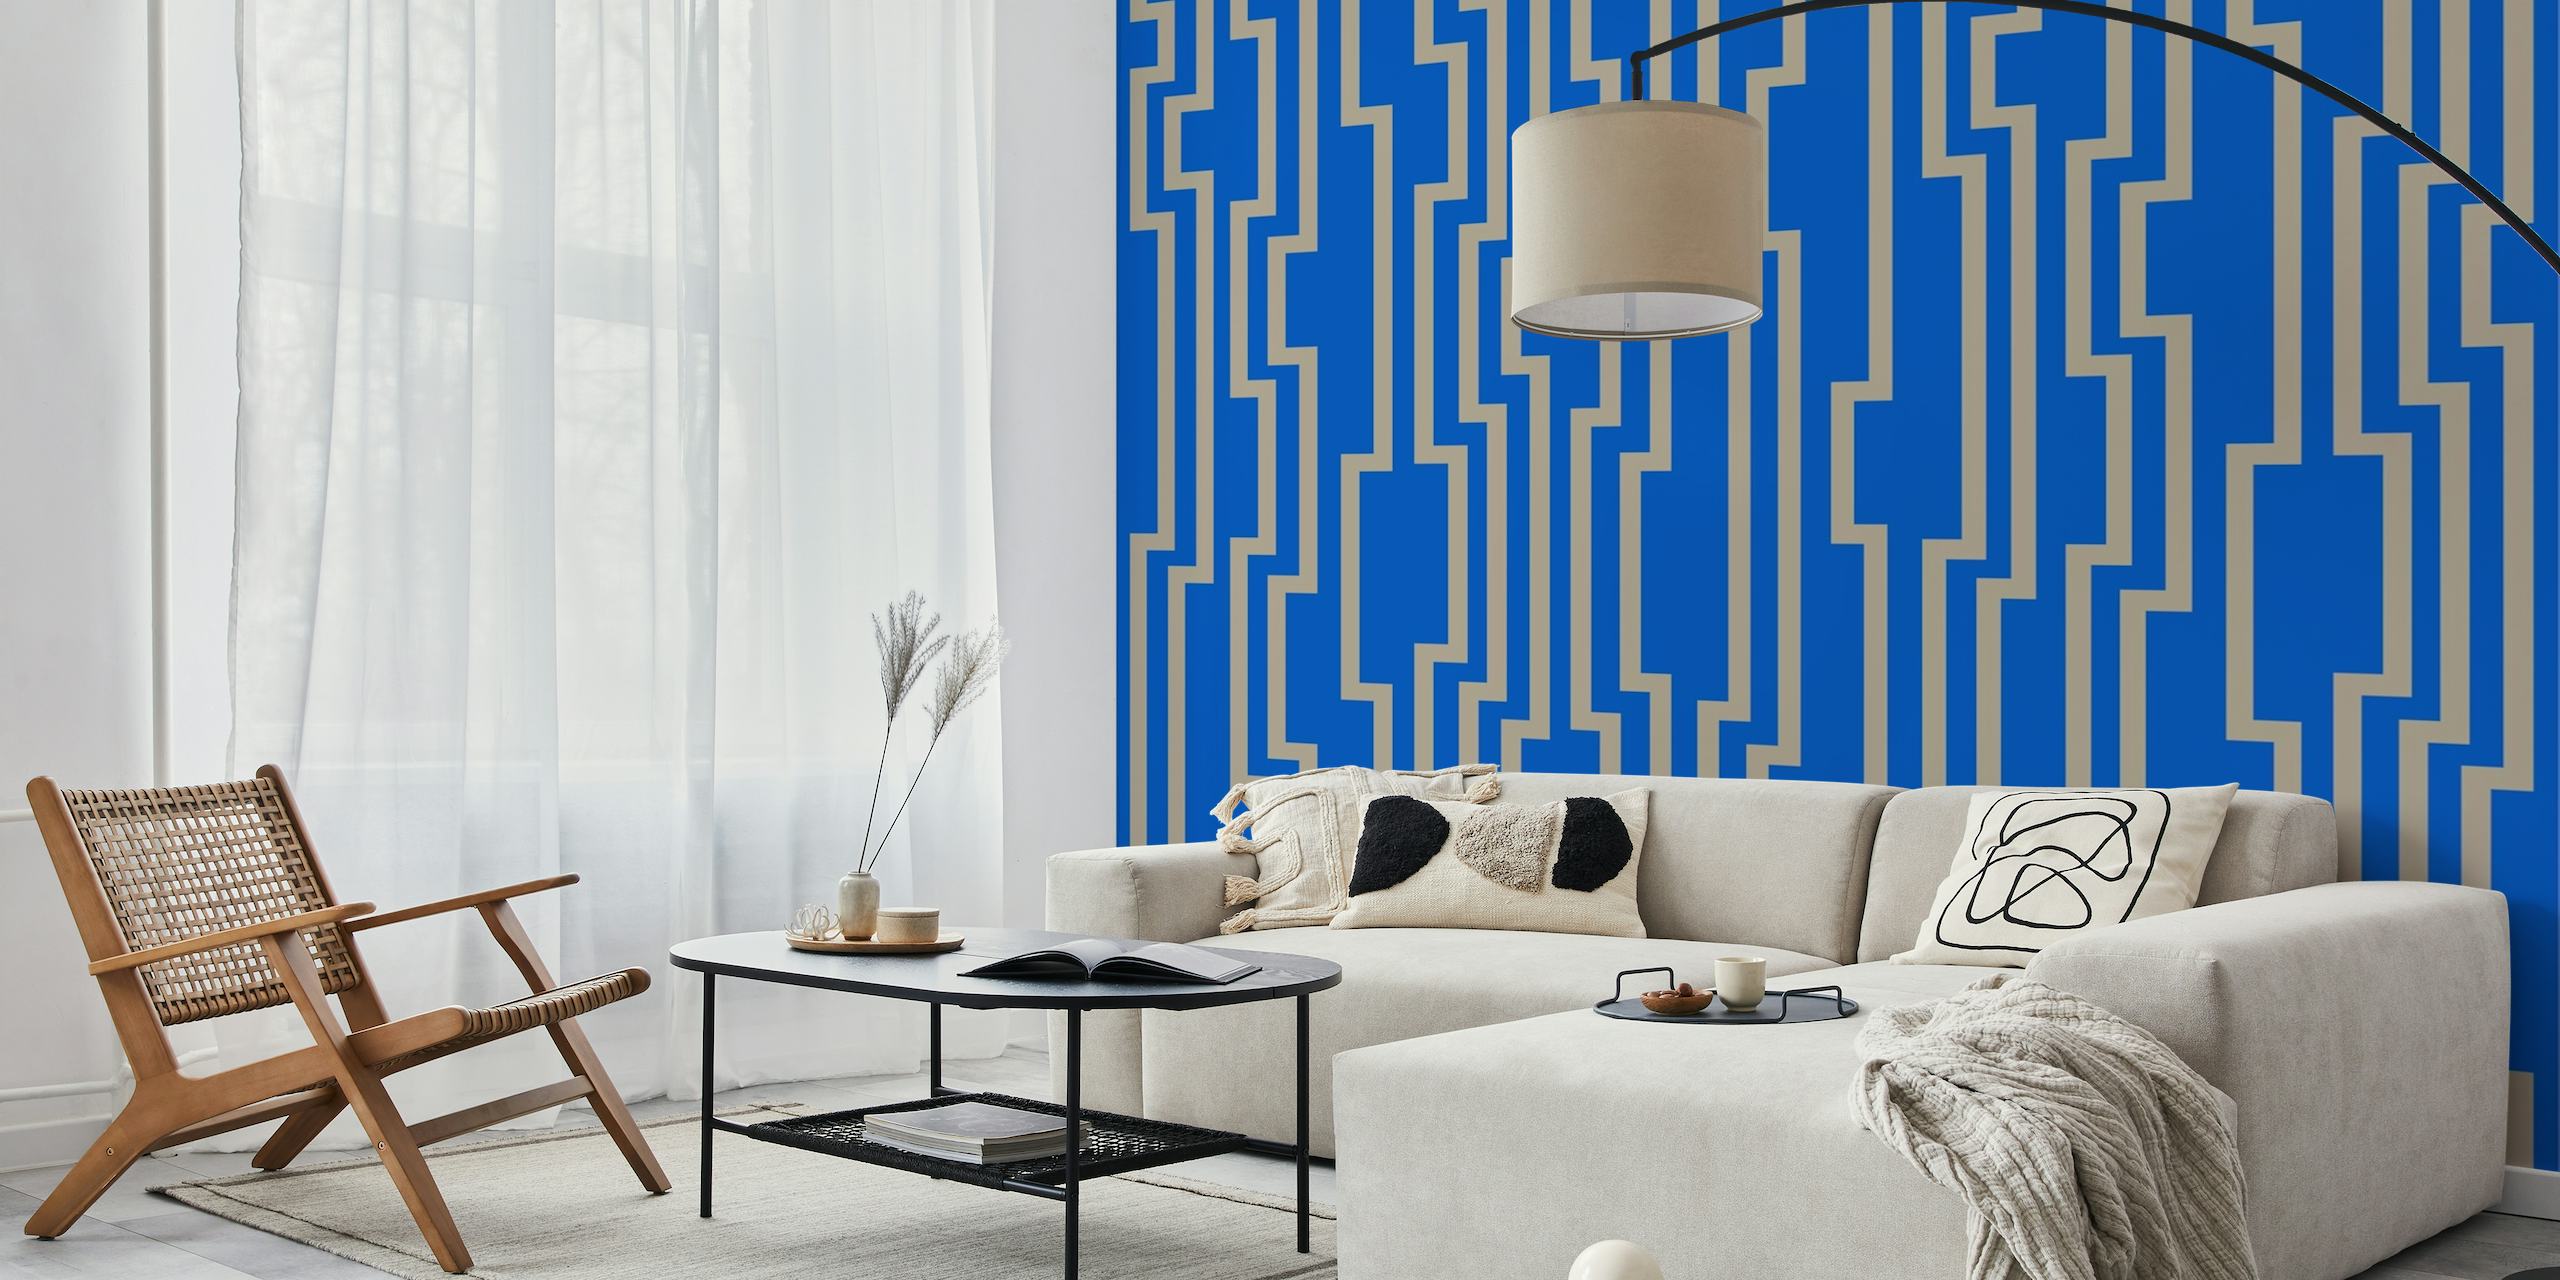 Geometric zig zag stripes wall mural in tan and blue colors.